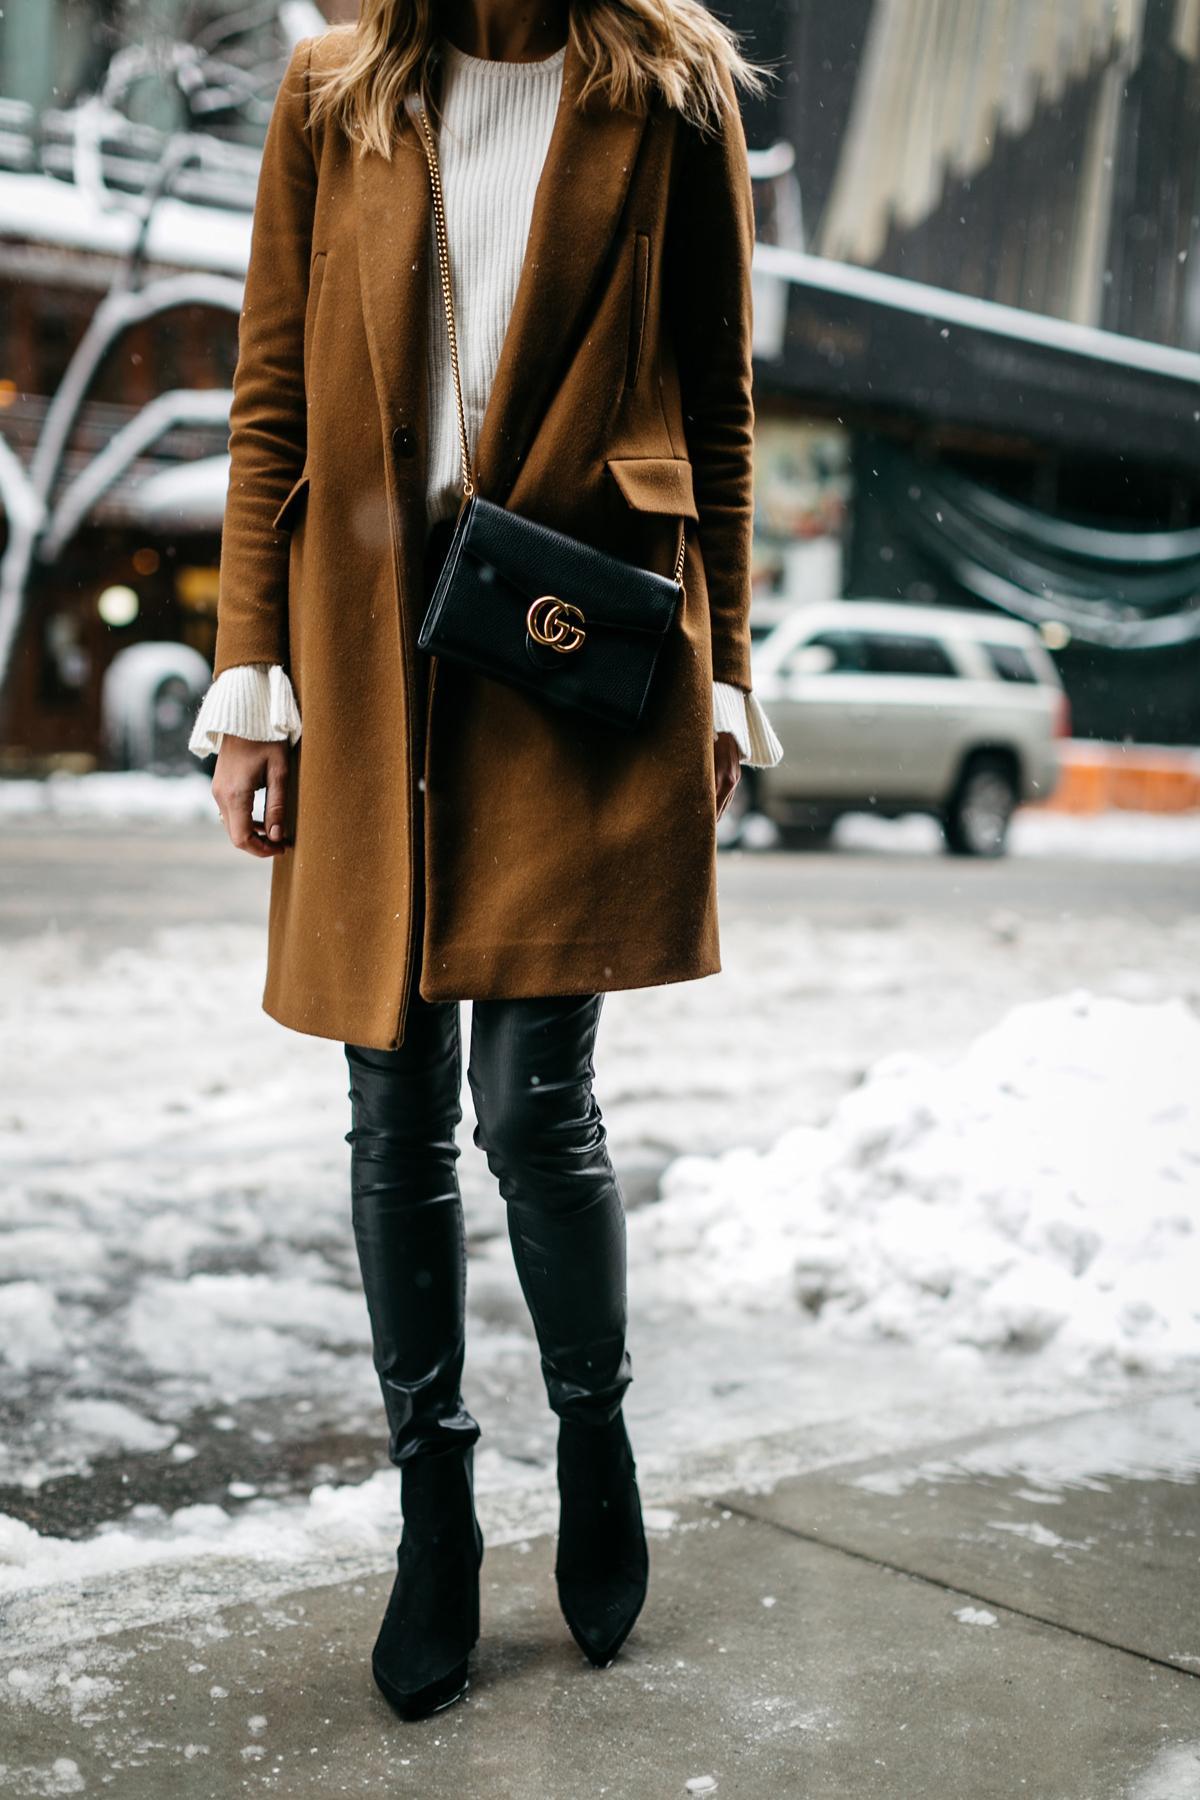 NYFW, Winter Outfit, Camel Wool Coat, White Ruffle Sleeve Sweater, Black Faux Leather Pants, Black Booties, Gucci Marmont Handbag, Street Style